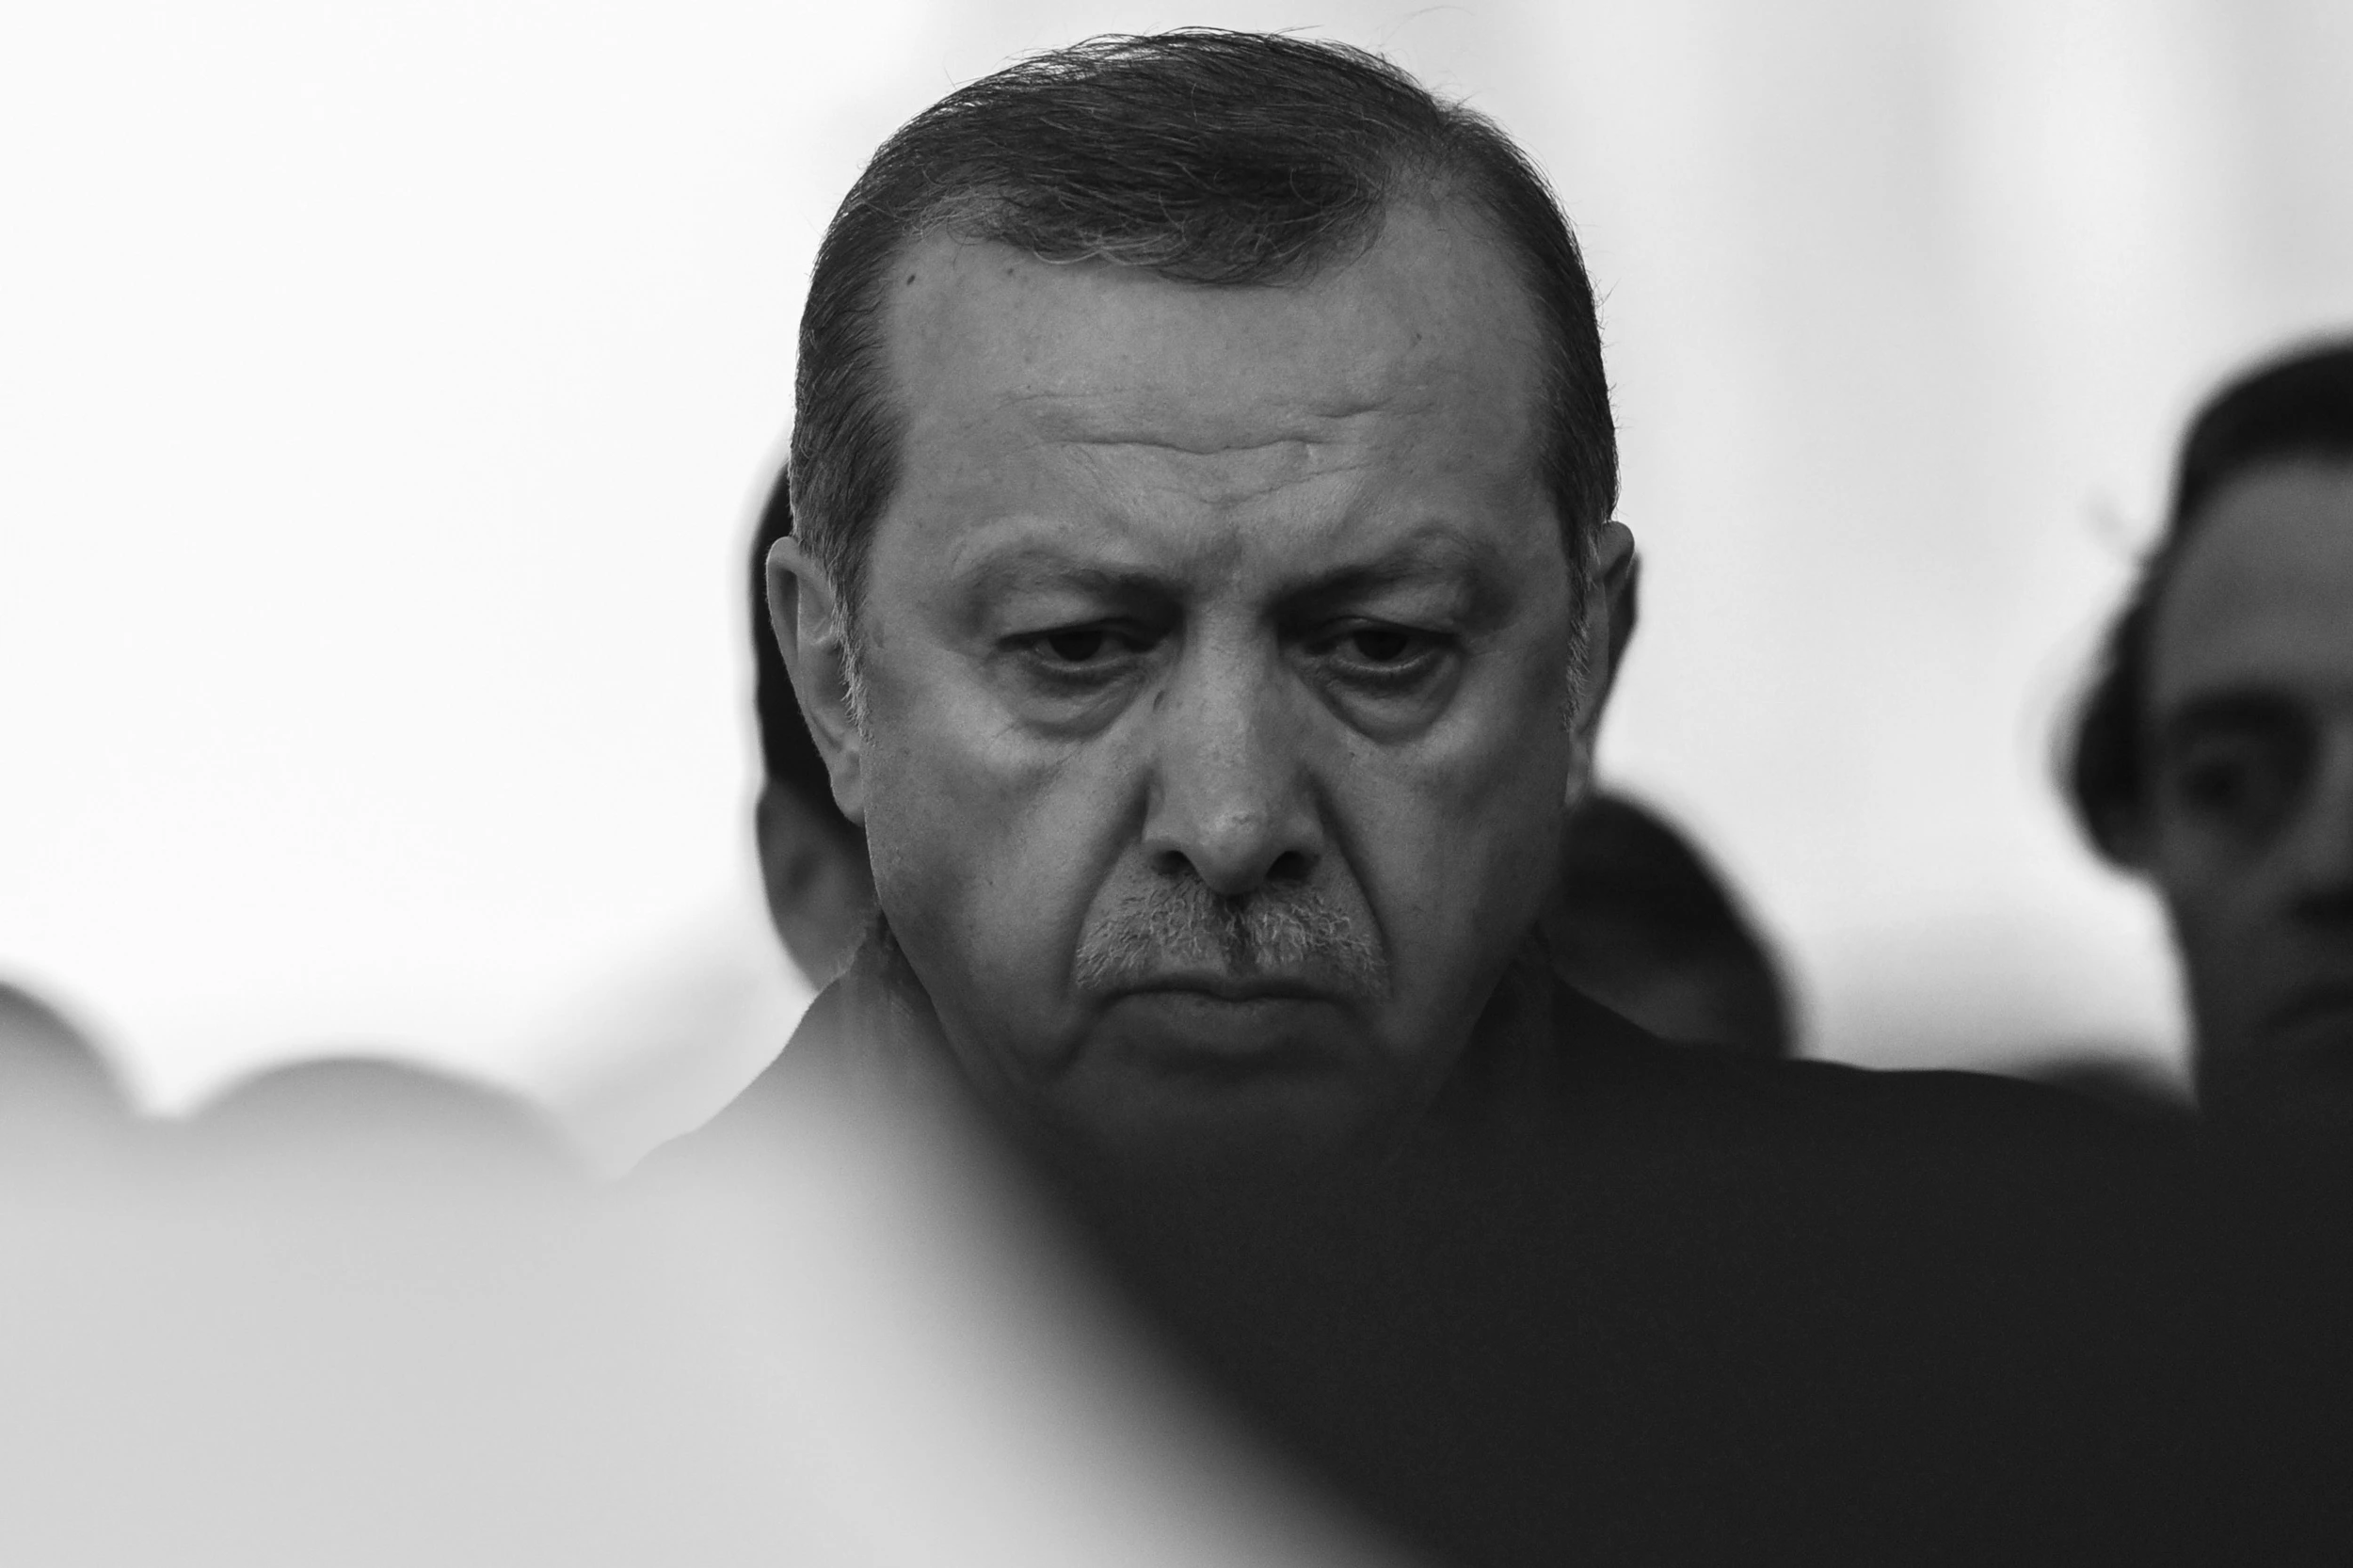 Turkish President Recep Tayyip Erdogan attends the funeral of Turkish police officer Hasim Usta, who was killed in the December 10 blasts outside Besiktas' Vodafone Arena football stadium, on December 12, 2016 in Istanbul. The death toll from the Istanbul twin bombings near the major football stadium has risen to 44, Turkish Health Minister Recep Akdag said on December 12. / AFP / OZAN KOSE (Photo credit should read OZAN KOSE/AFP via Getty Images)